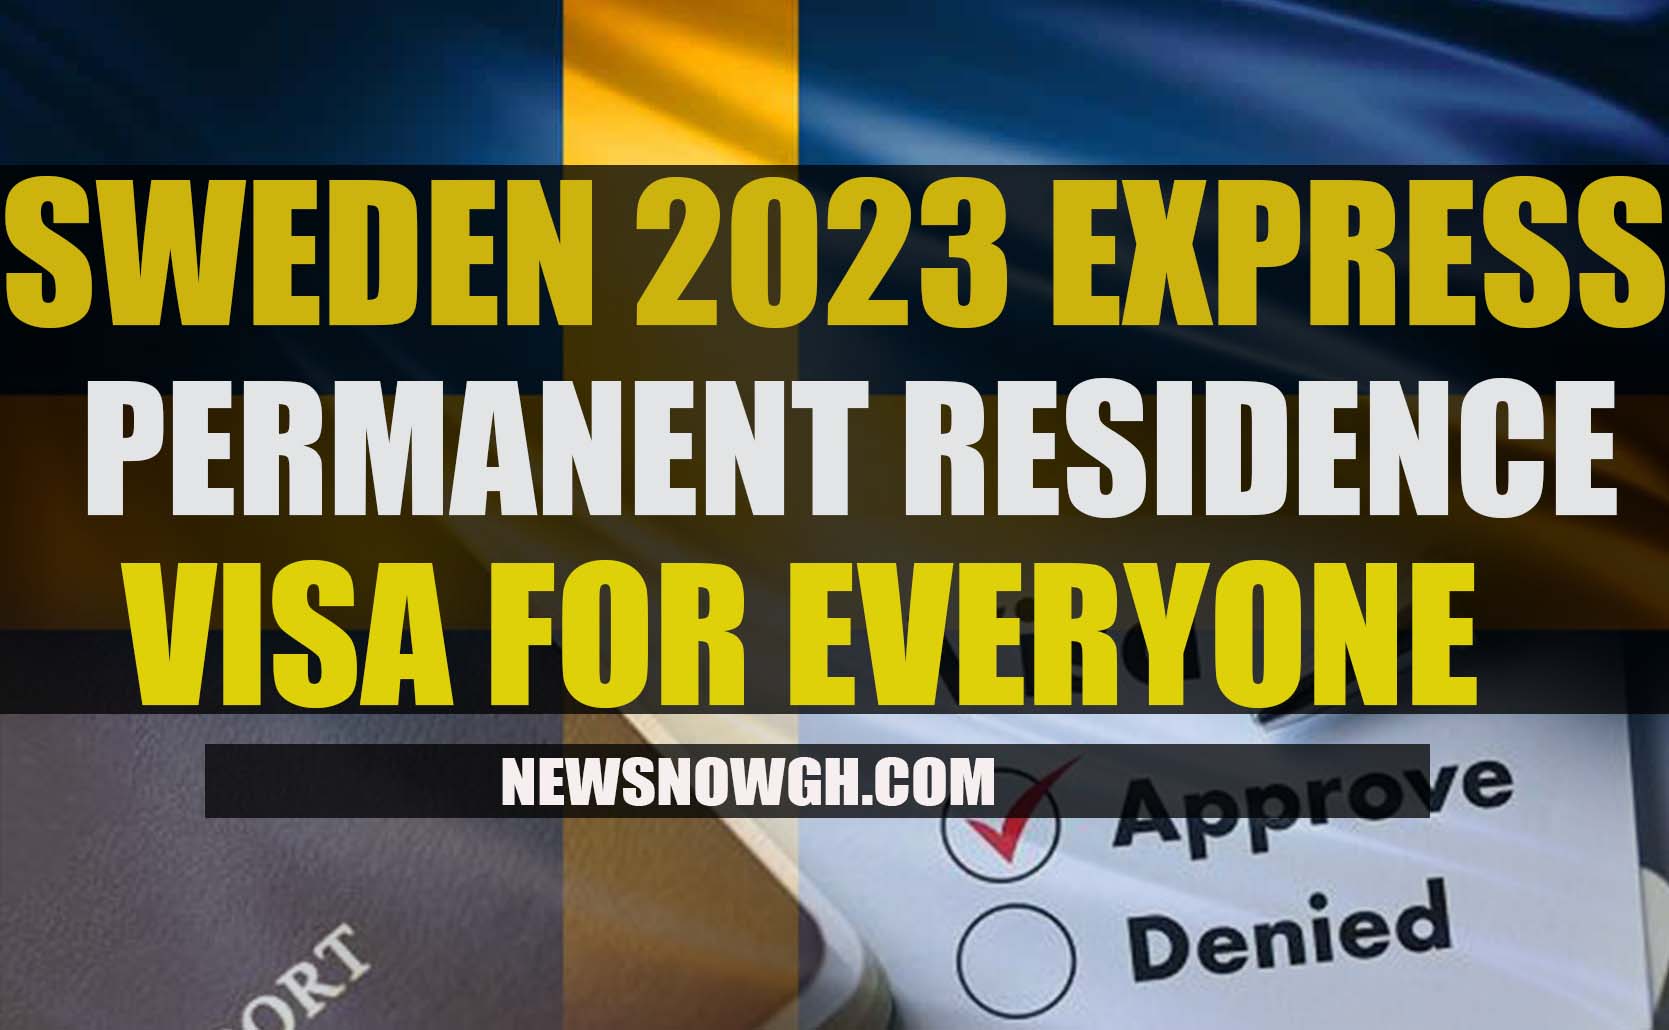 SWEDEN 2023 EXPRESS PERMANENT RESIDENCE